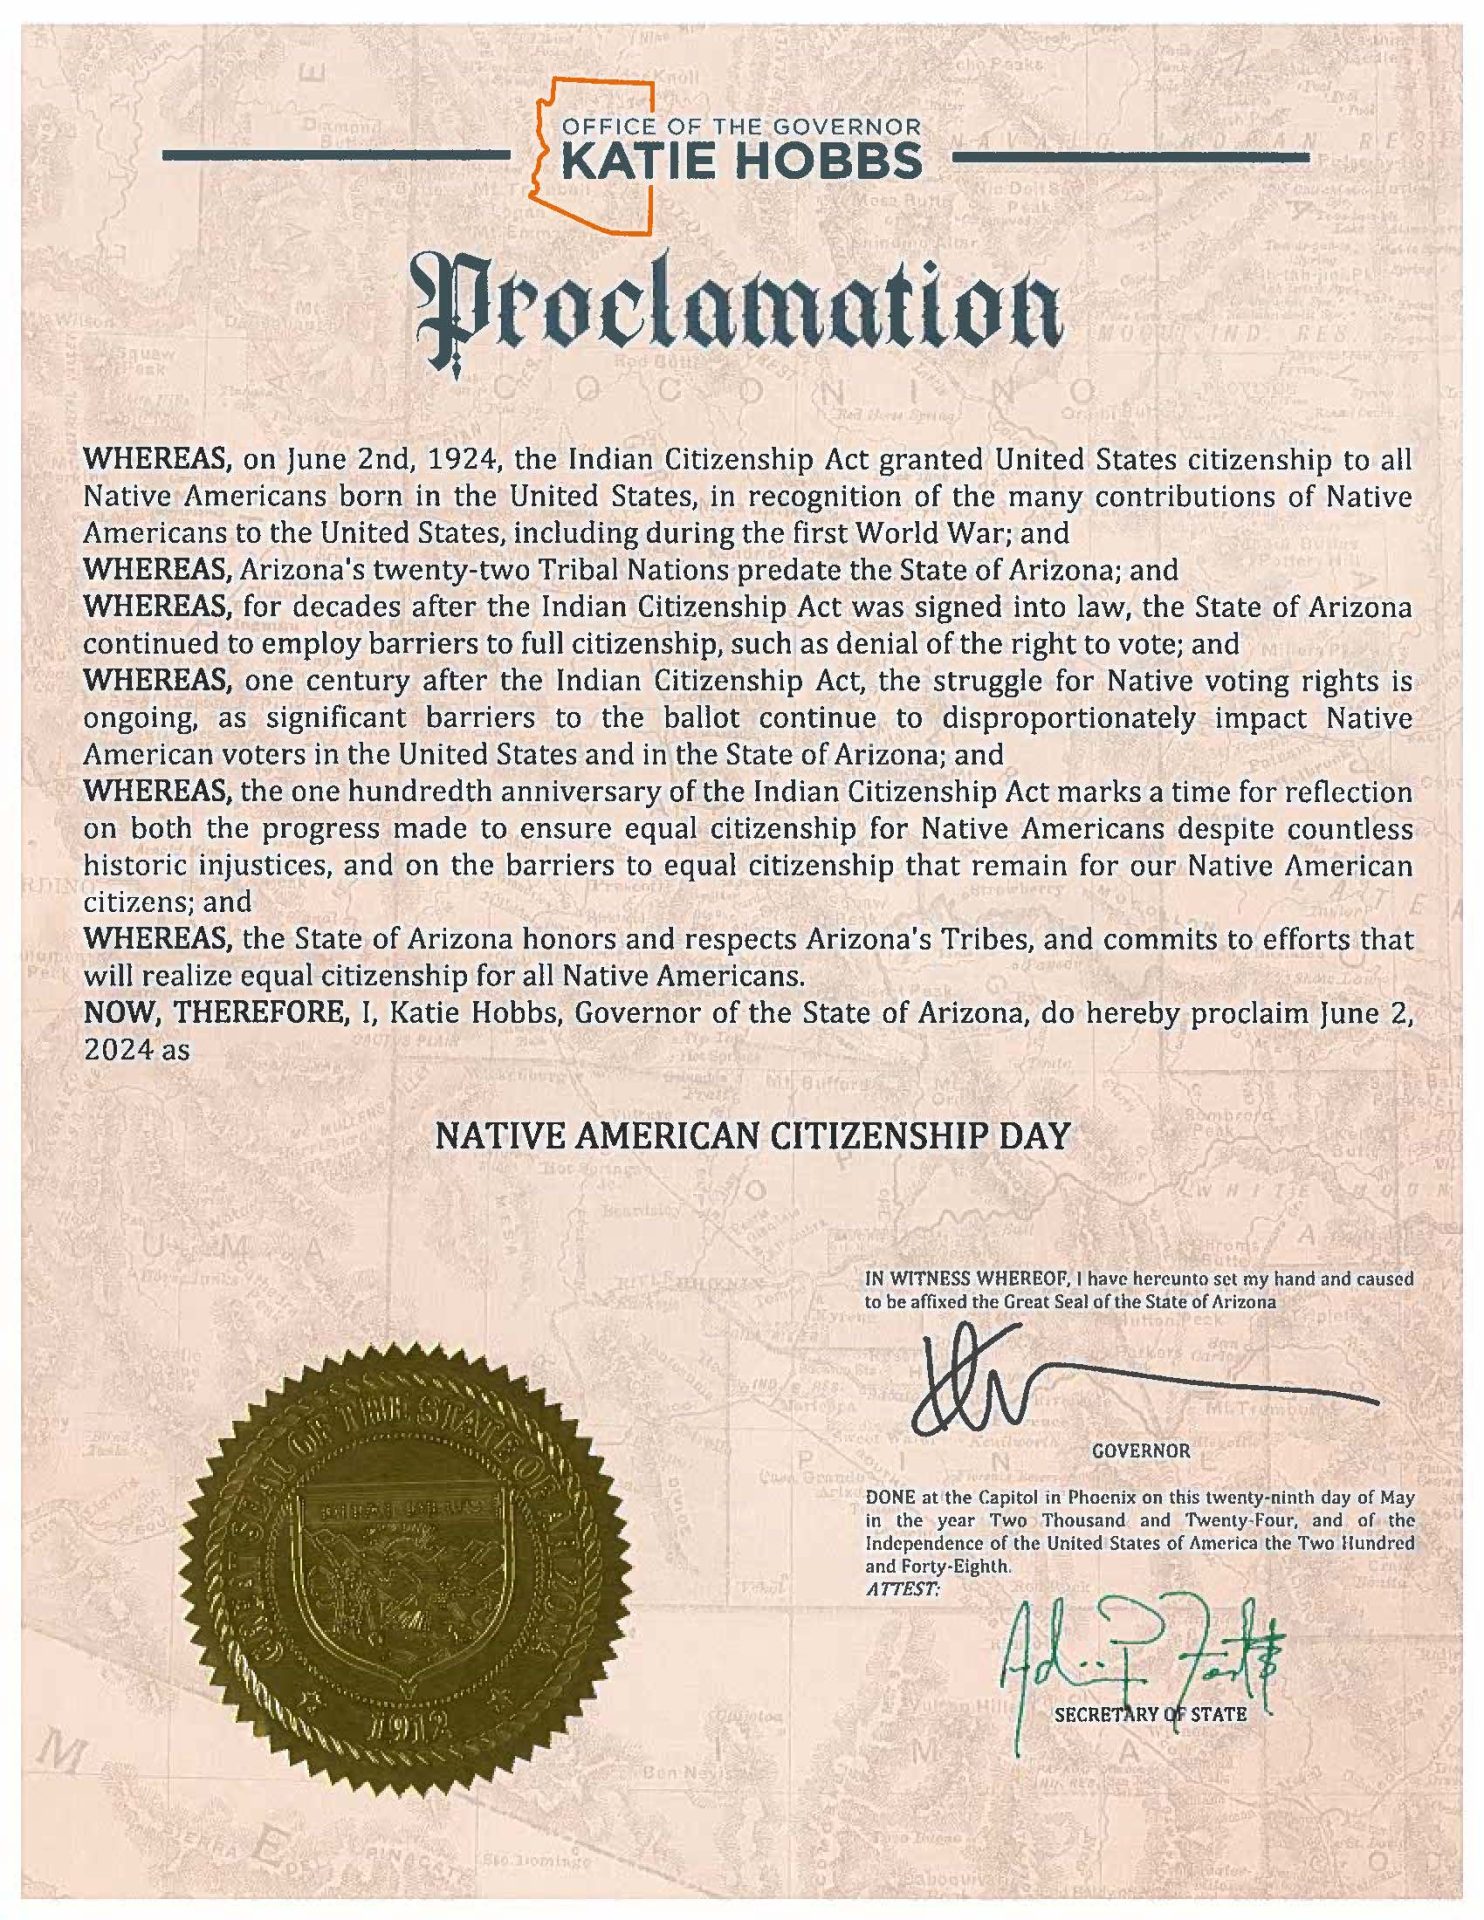 Governor Hobbs Proclaims June 2 Native American Citizenship Day